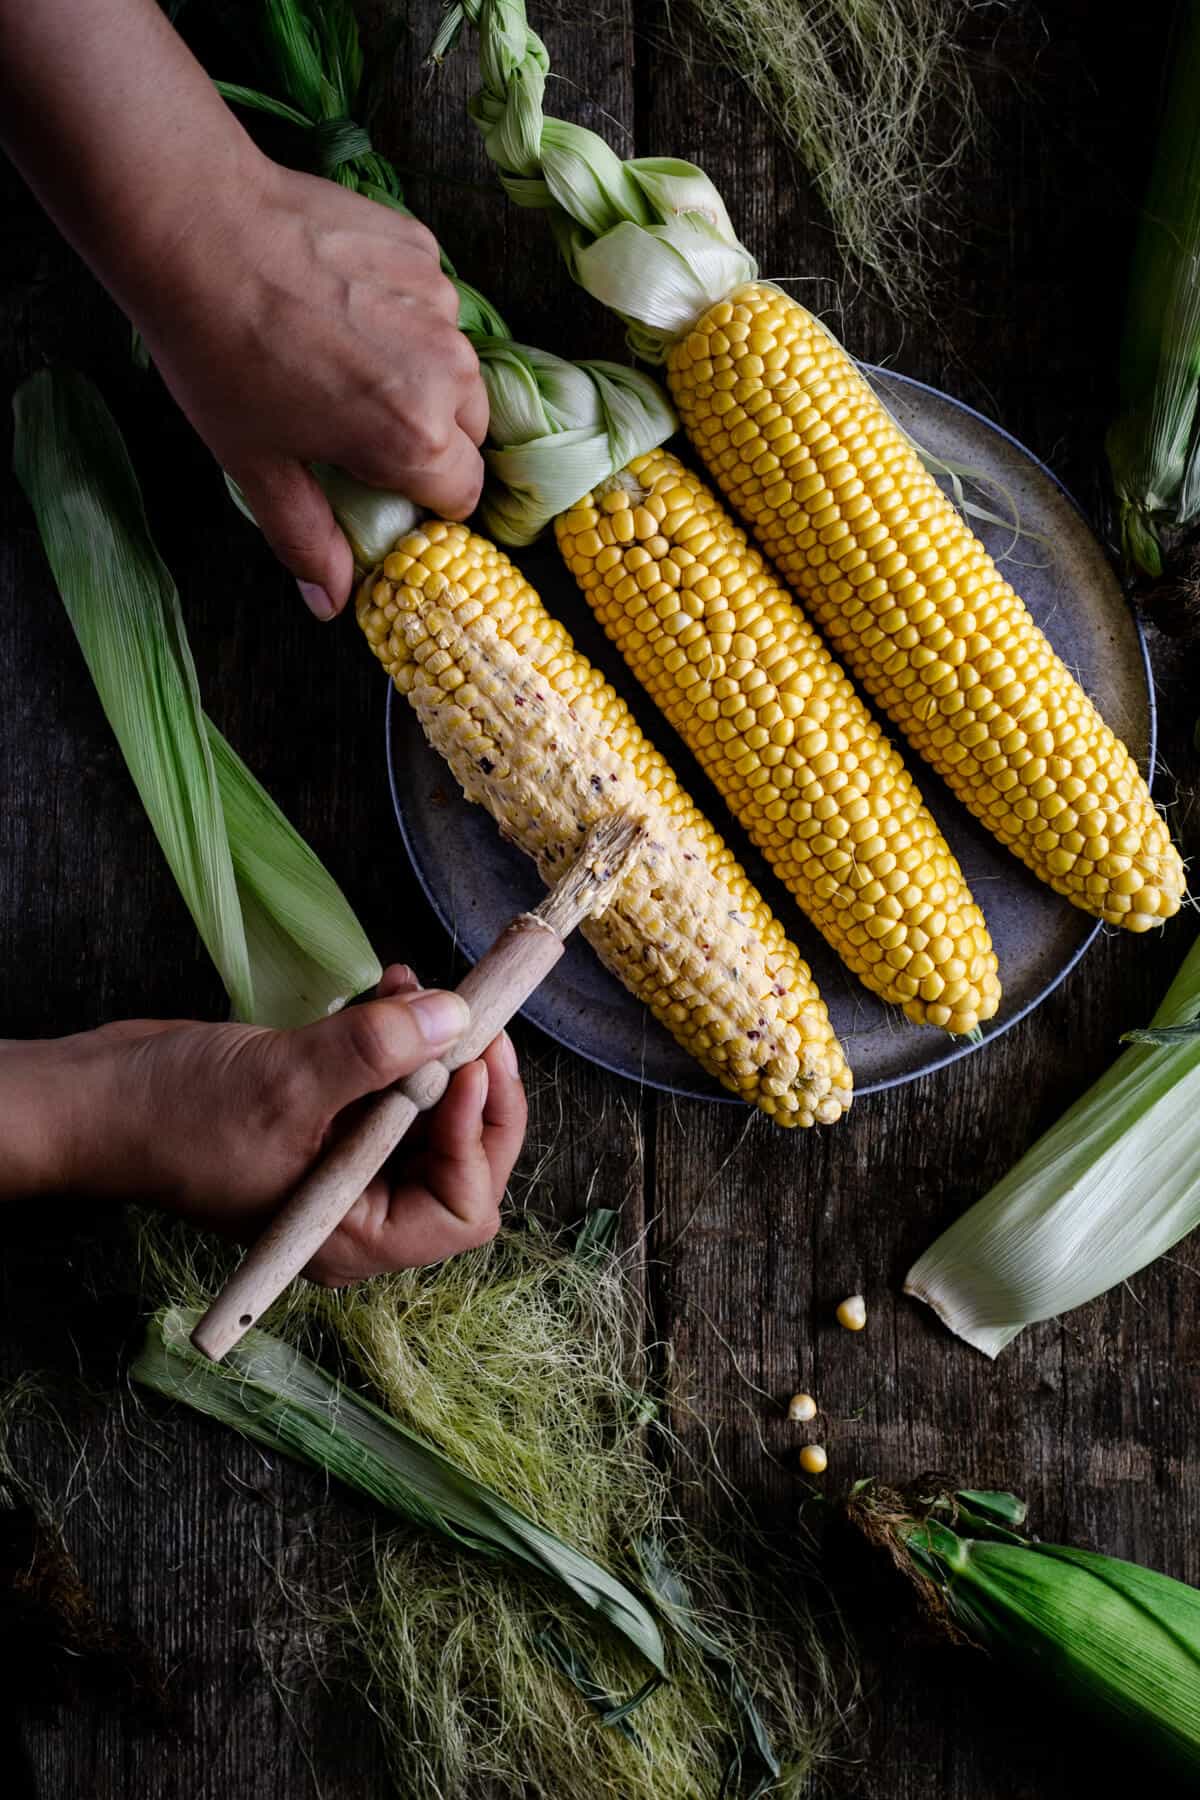 Spreading chilli-infused butter on cobs of corn with pastry brush